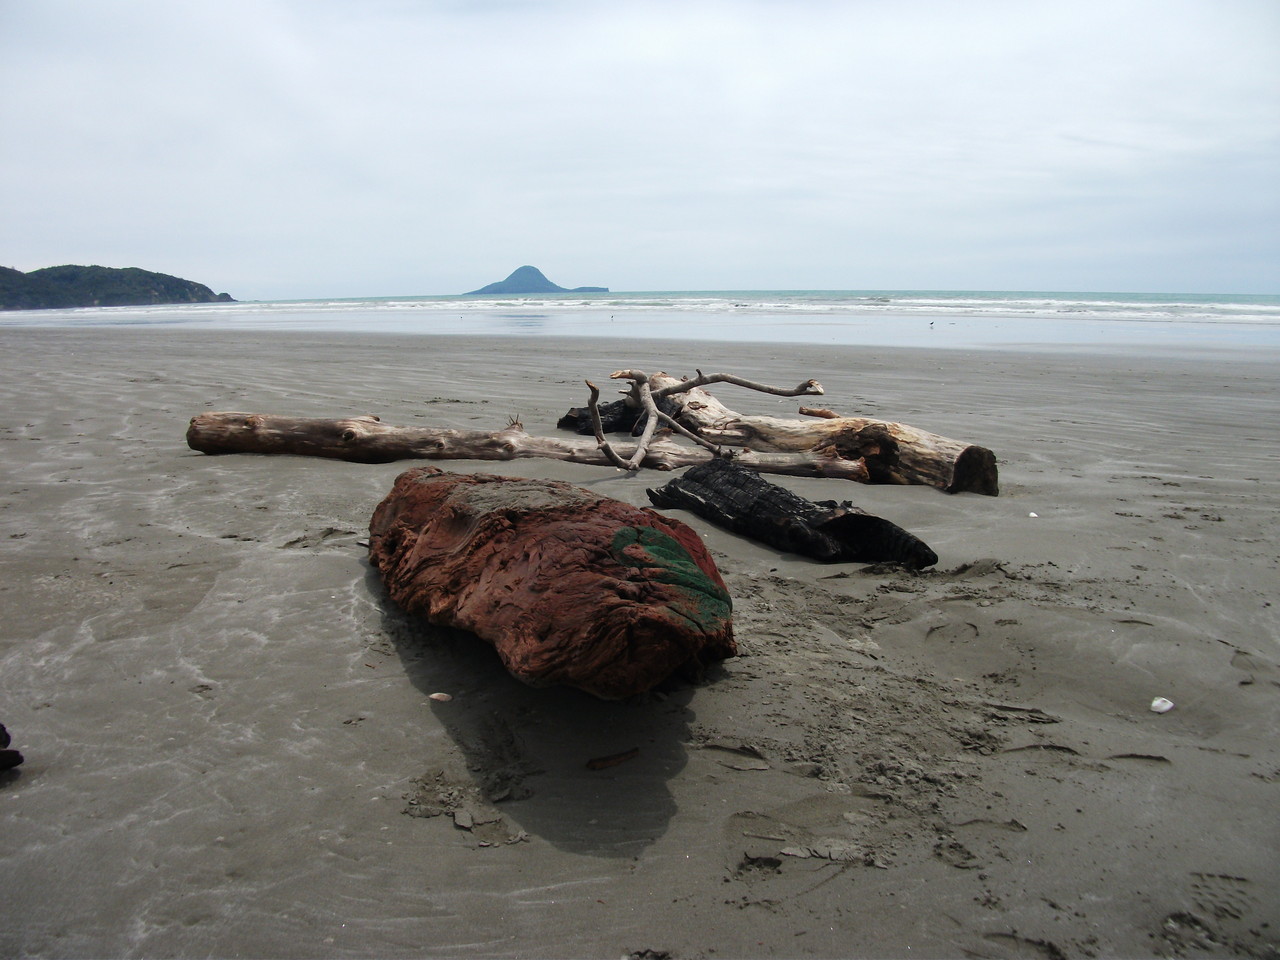 Ohope beach (Whale Island in the distance)